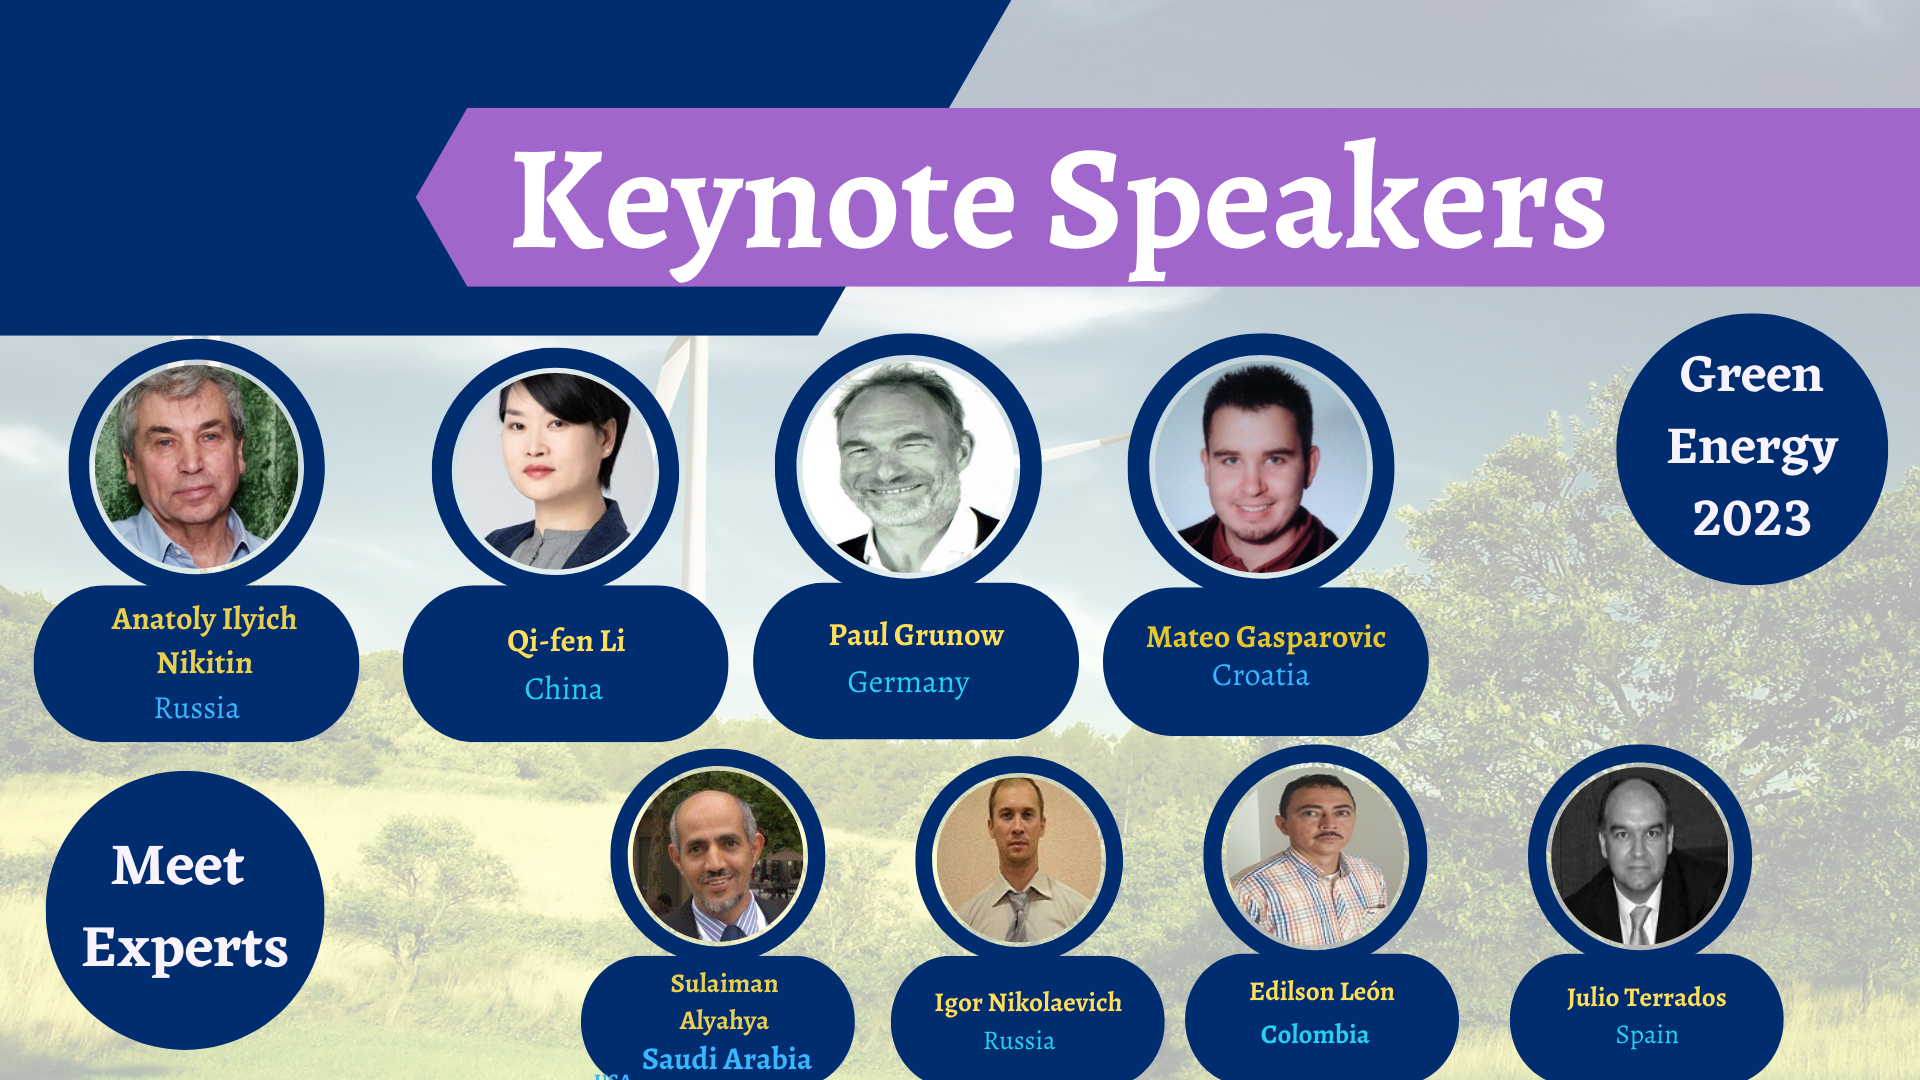 Meet our keynote speakers at Green Energy 2023 conference Longdom